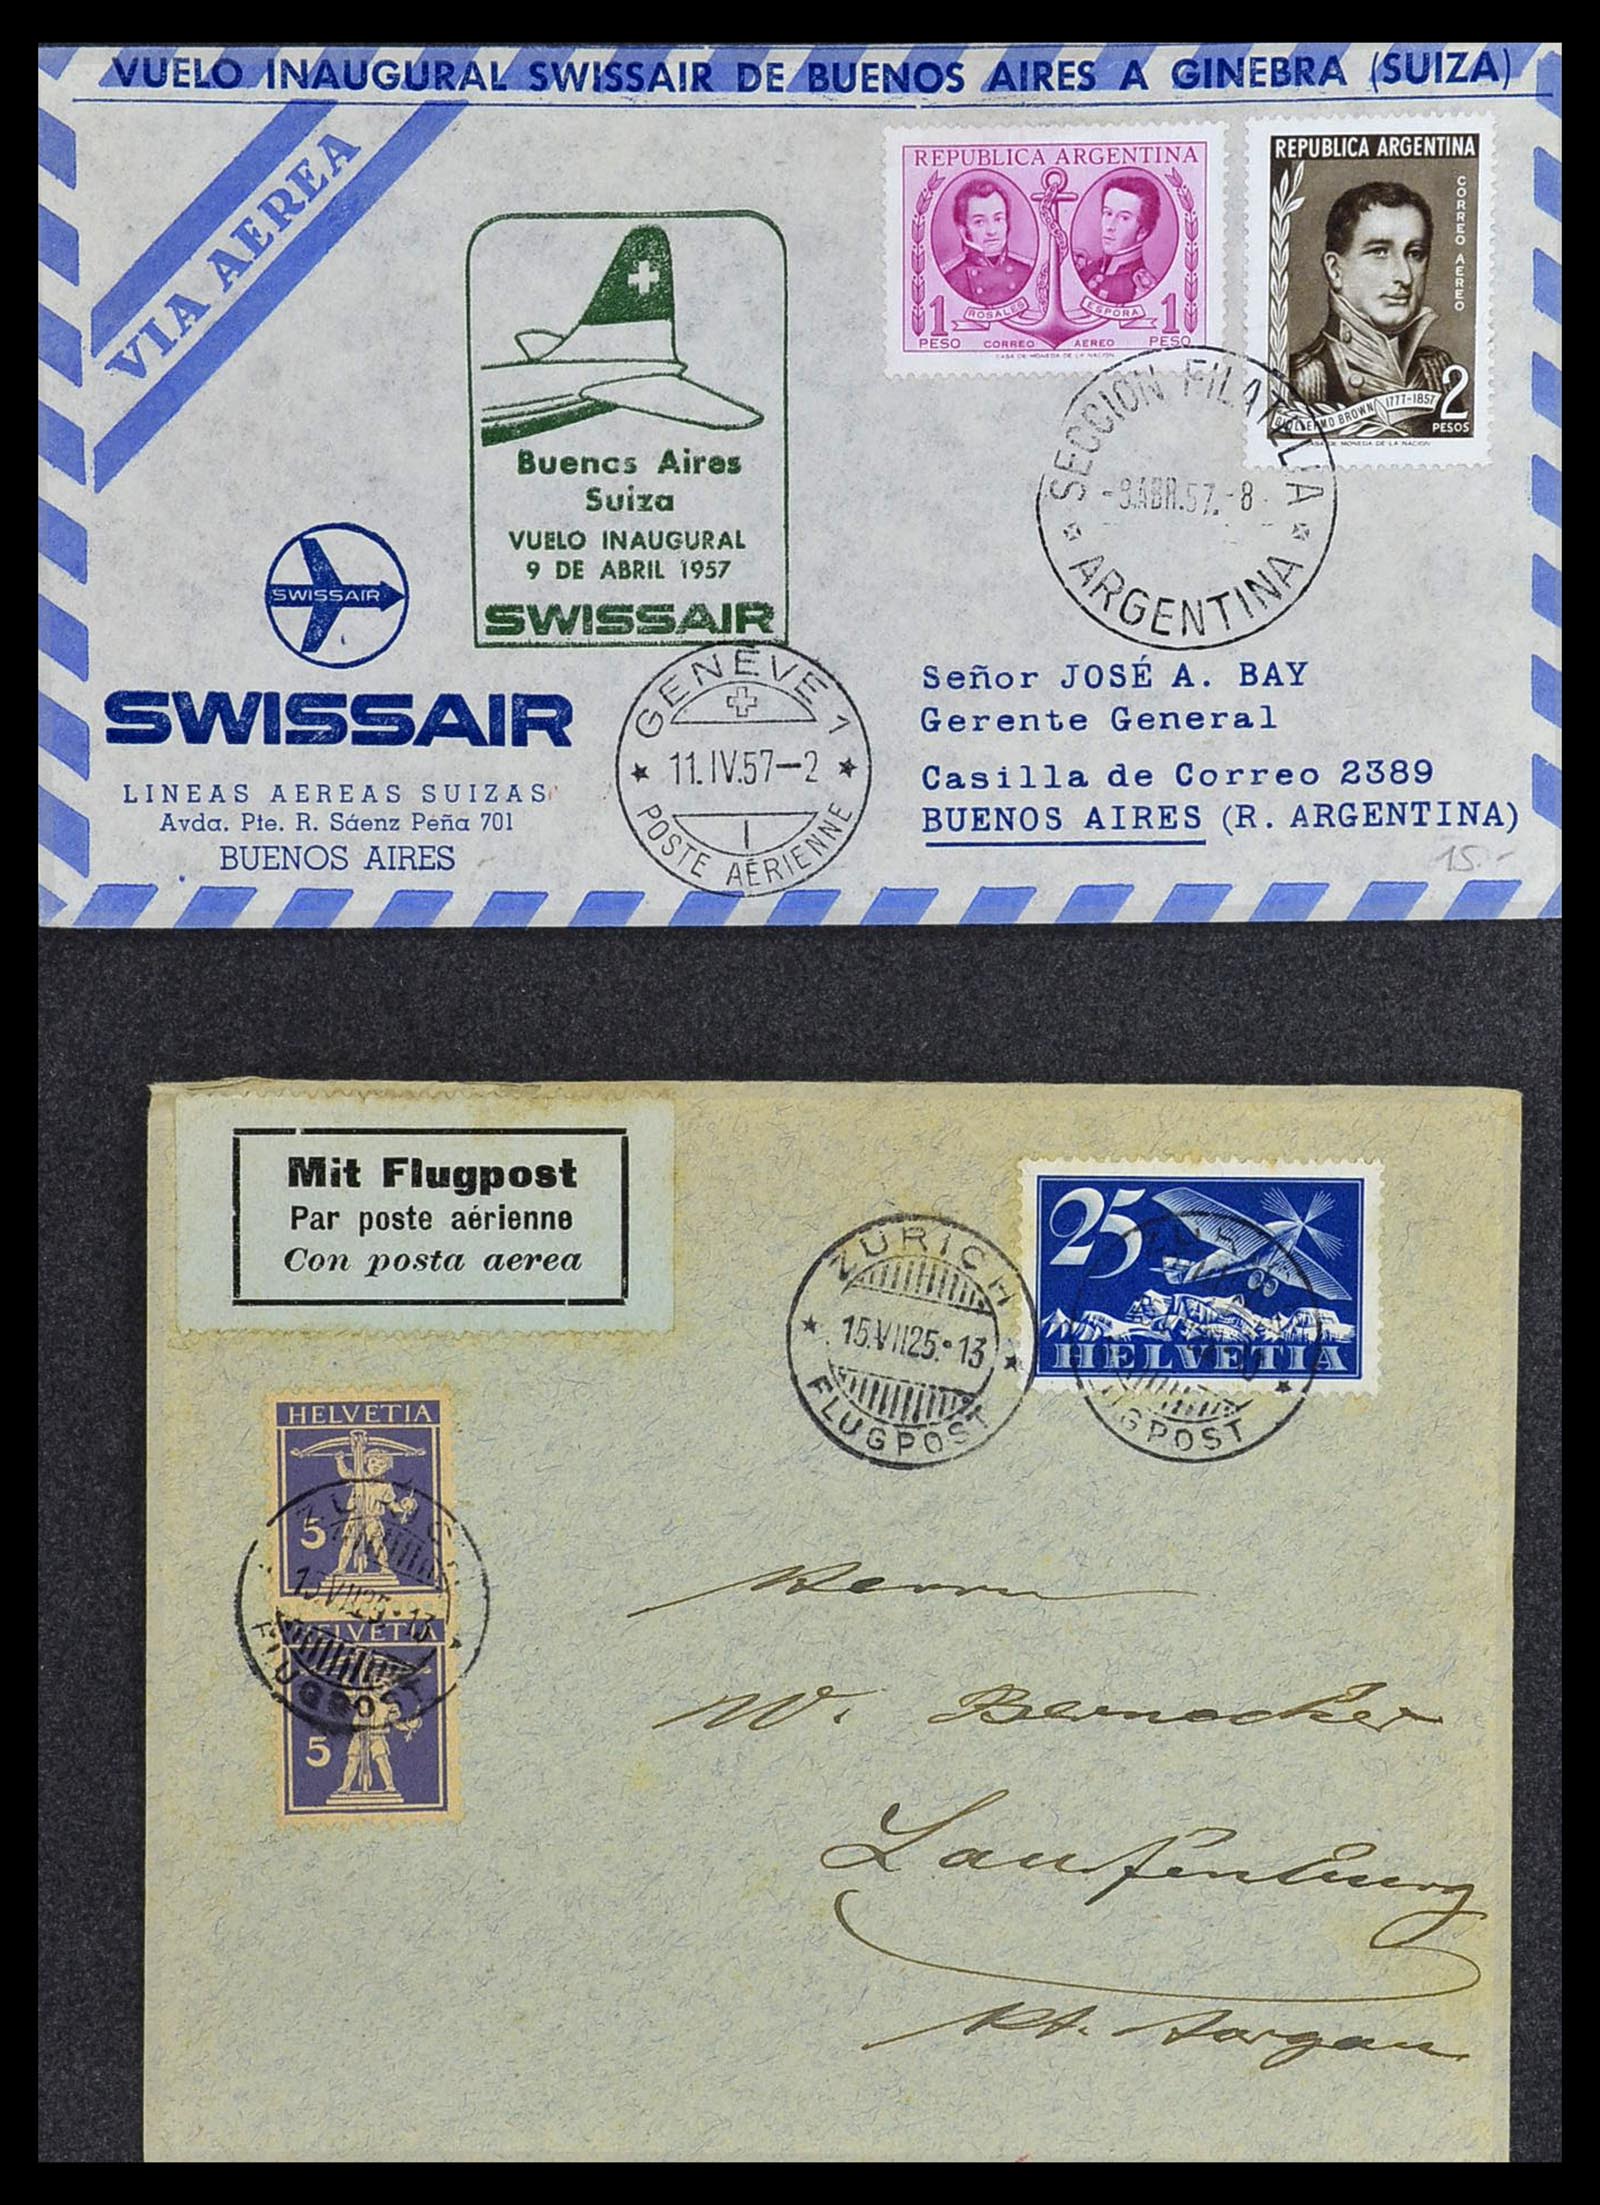 34141 108 - Stamp collection 34141 Switzerland airmail covers 1920-1960.